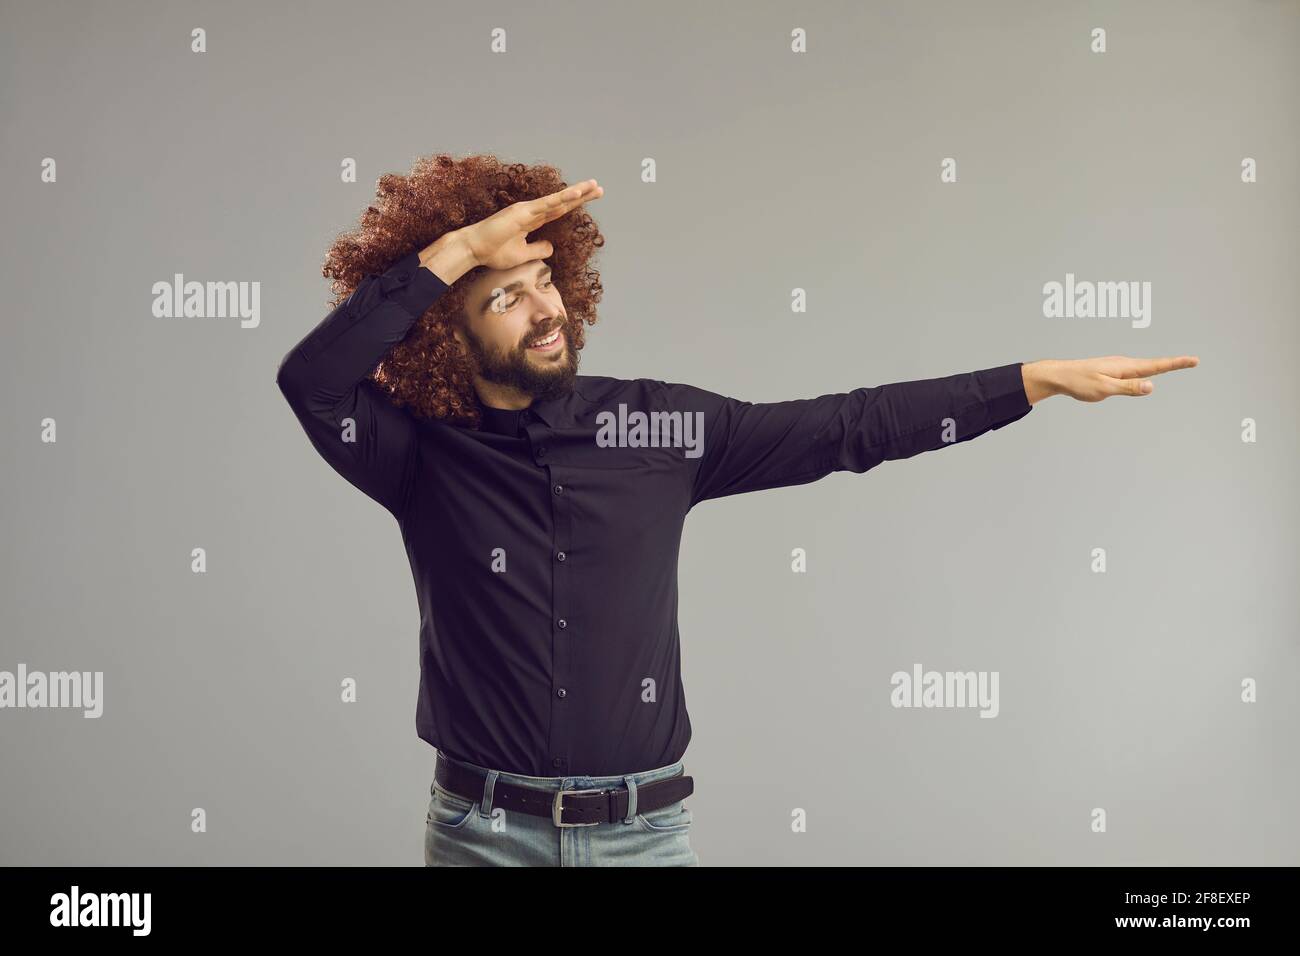 Funny guy in big curly wig doing dab dancing move in studio with gray background Stock Photo